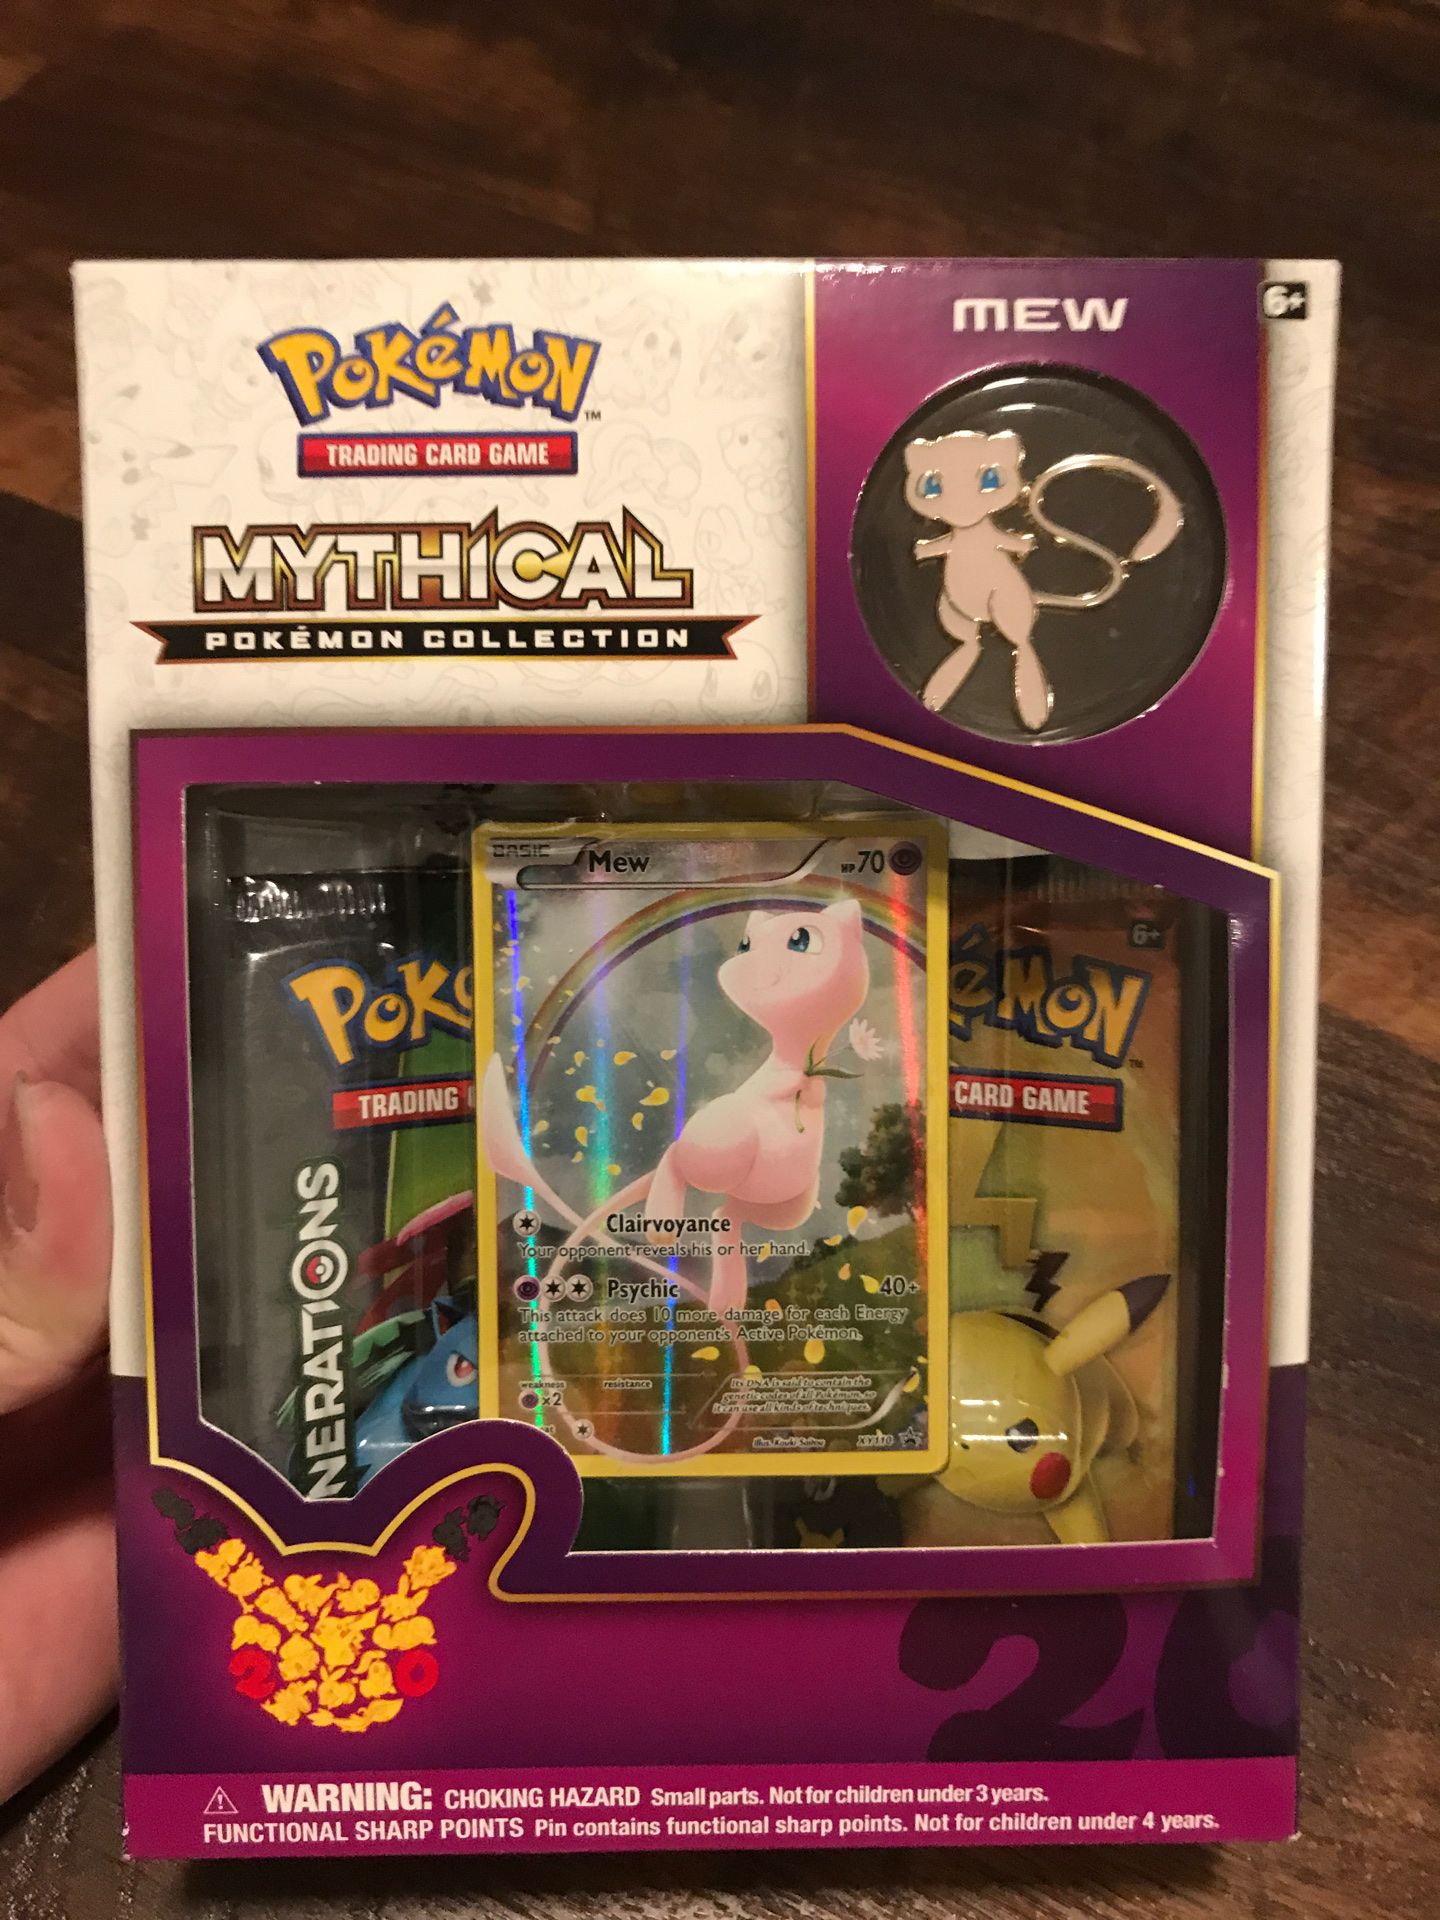 Pokemon mew mythical collection box